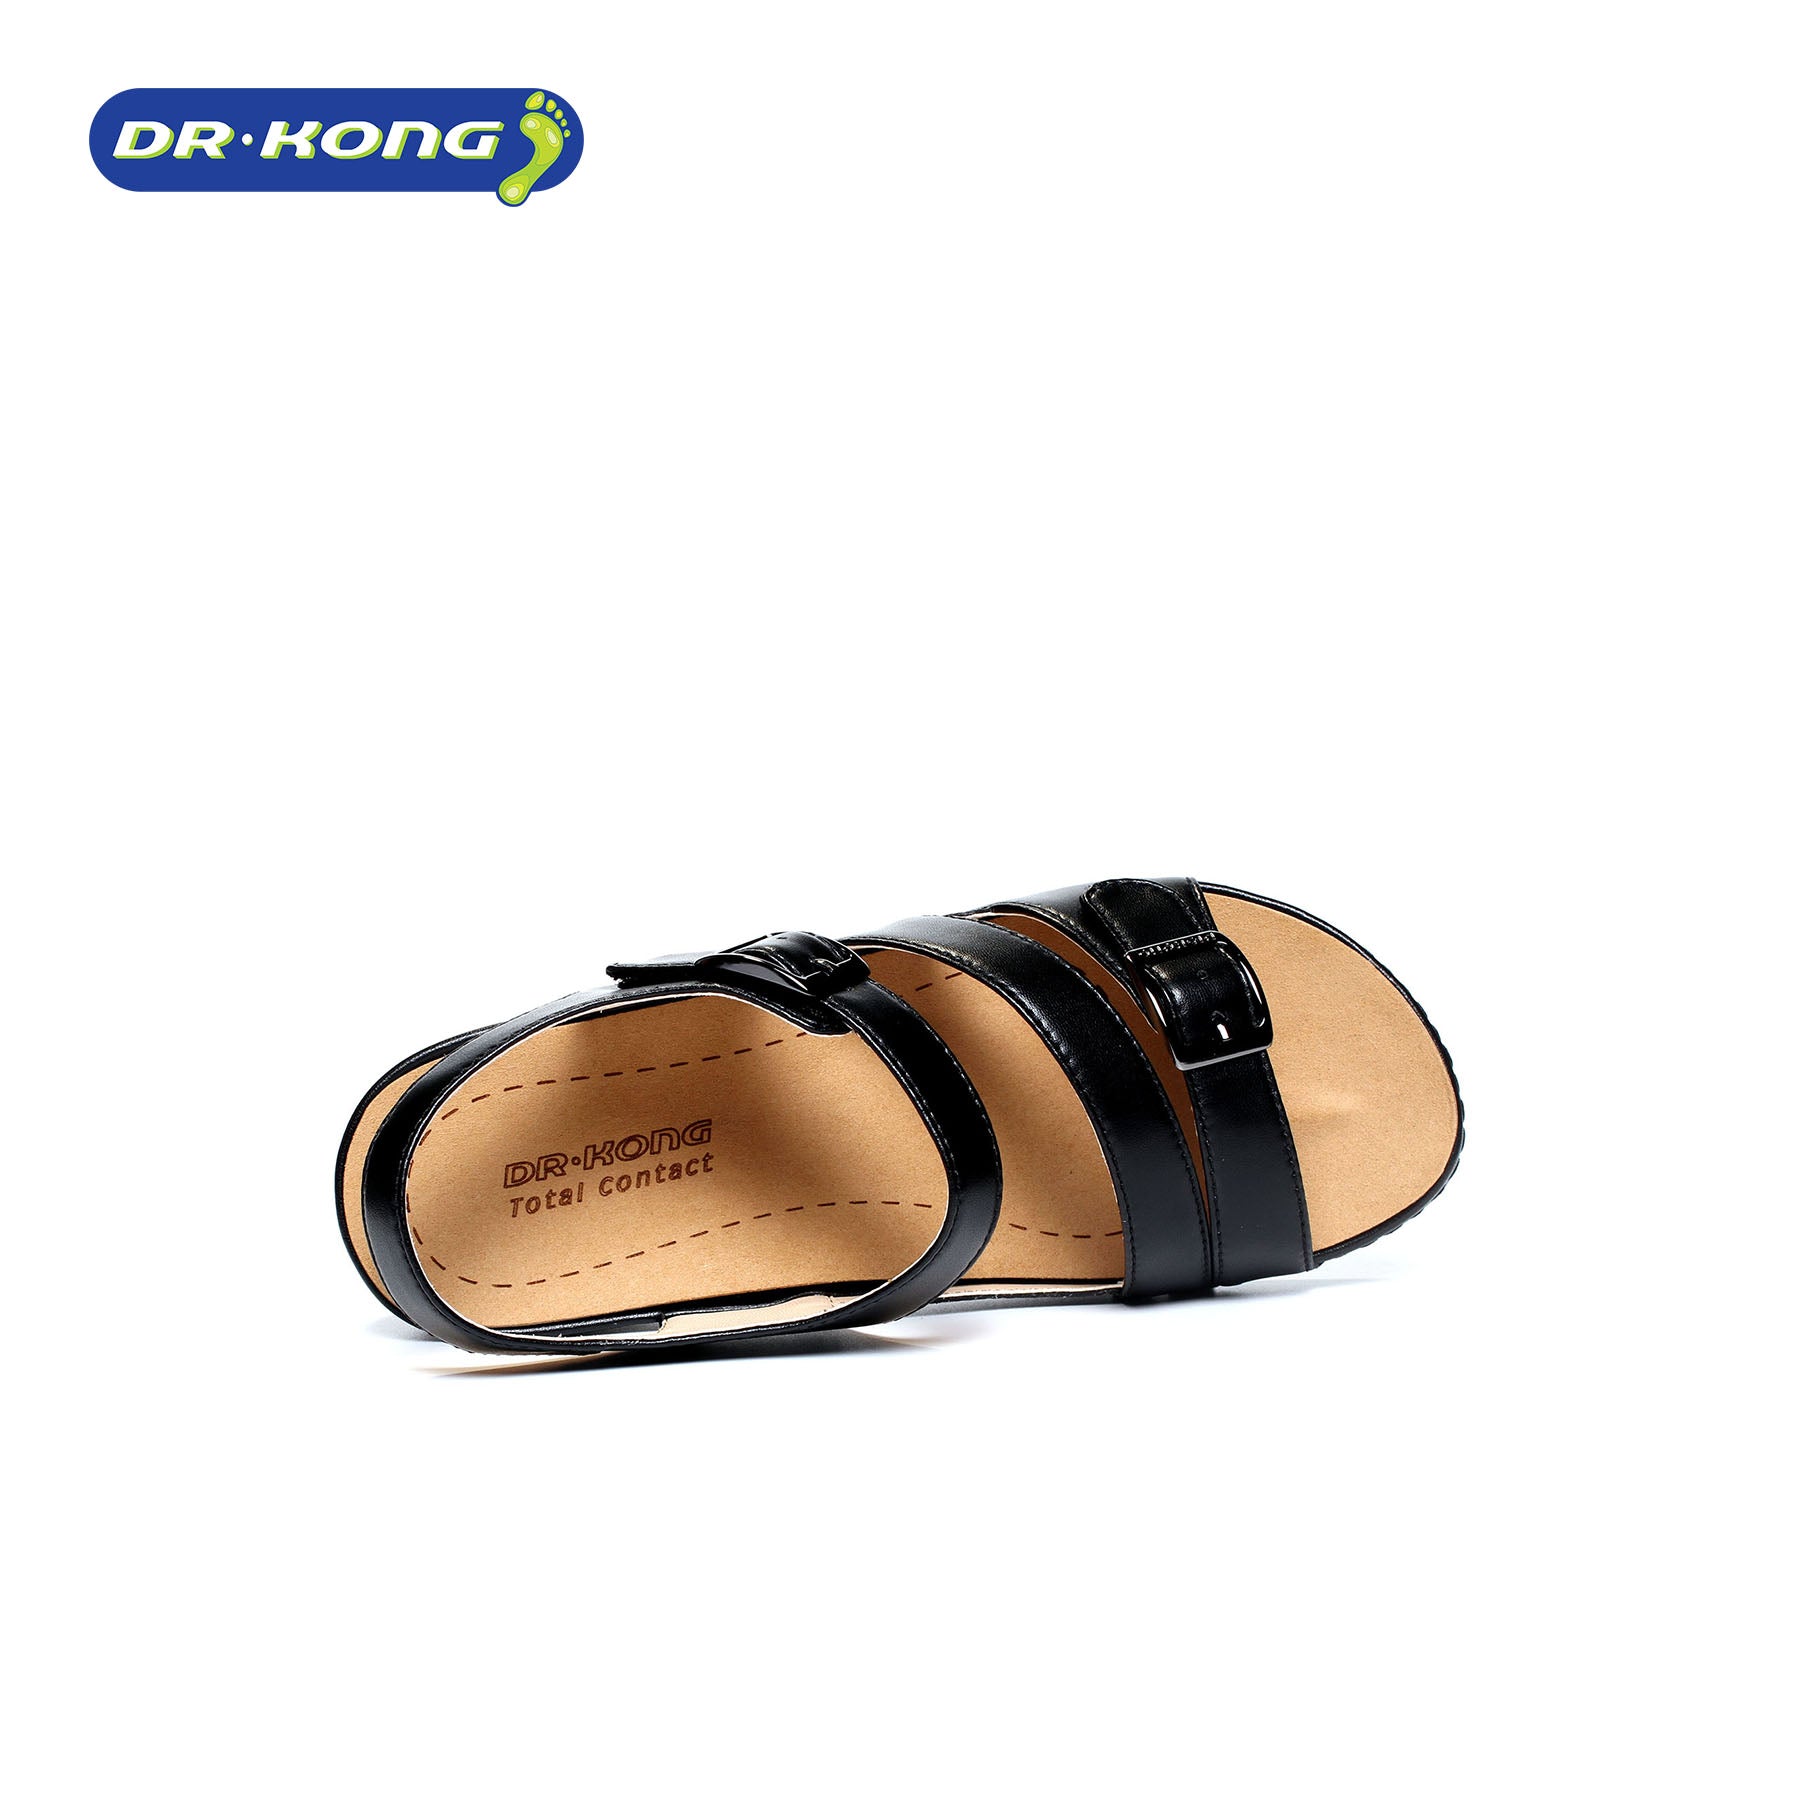 Dr. Kong Total Contact Sandals S8000272